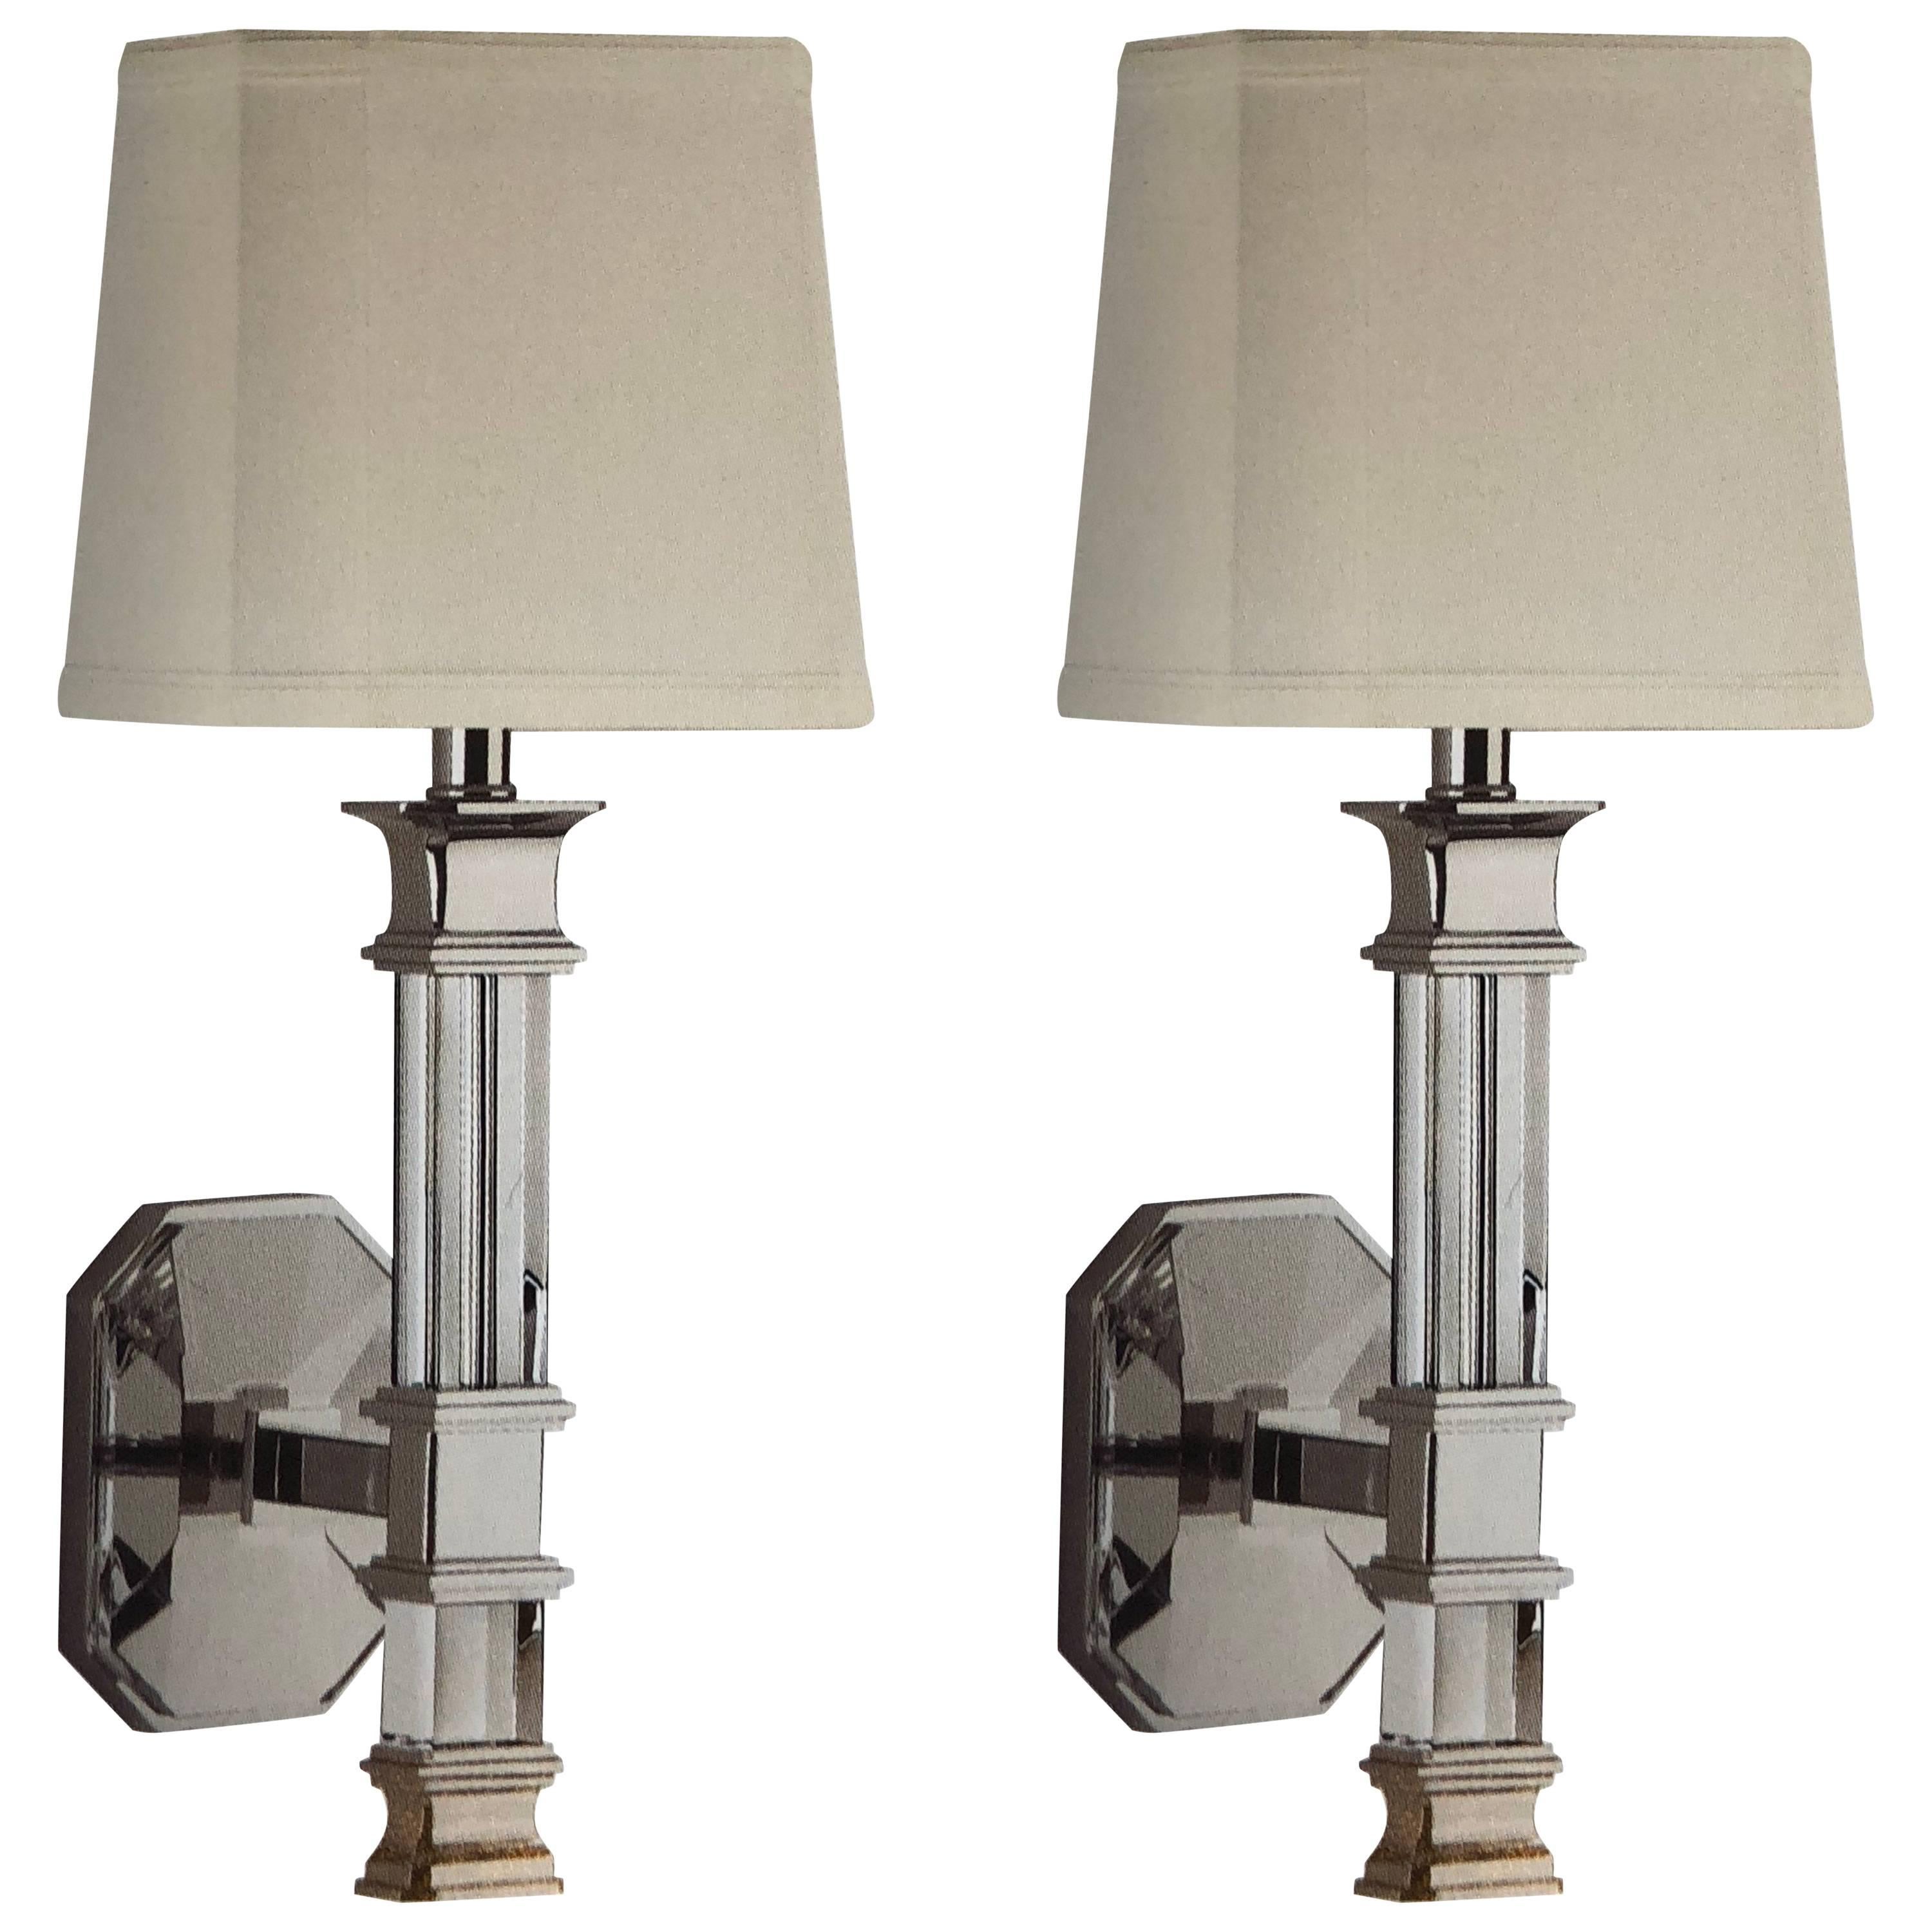 Pair of Italian Mid-Century Modern Style Solid Crystal & Polished Nickel Sconces